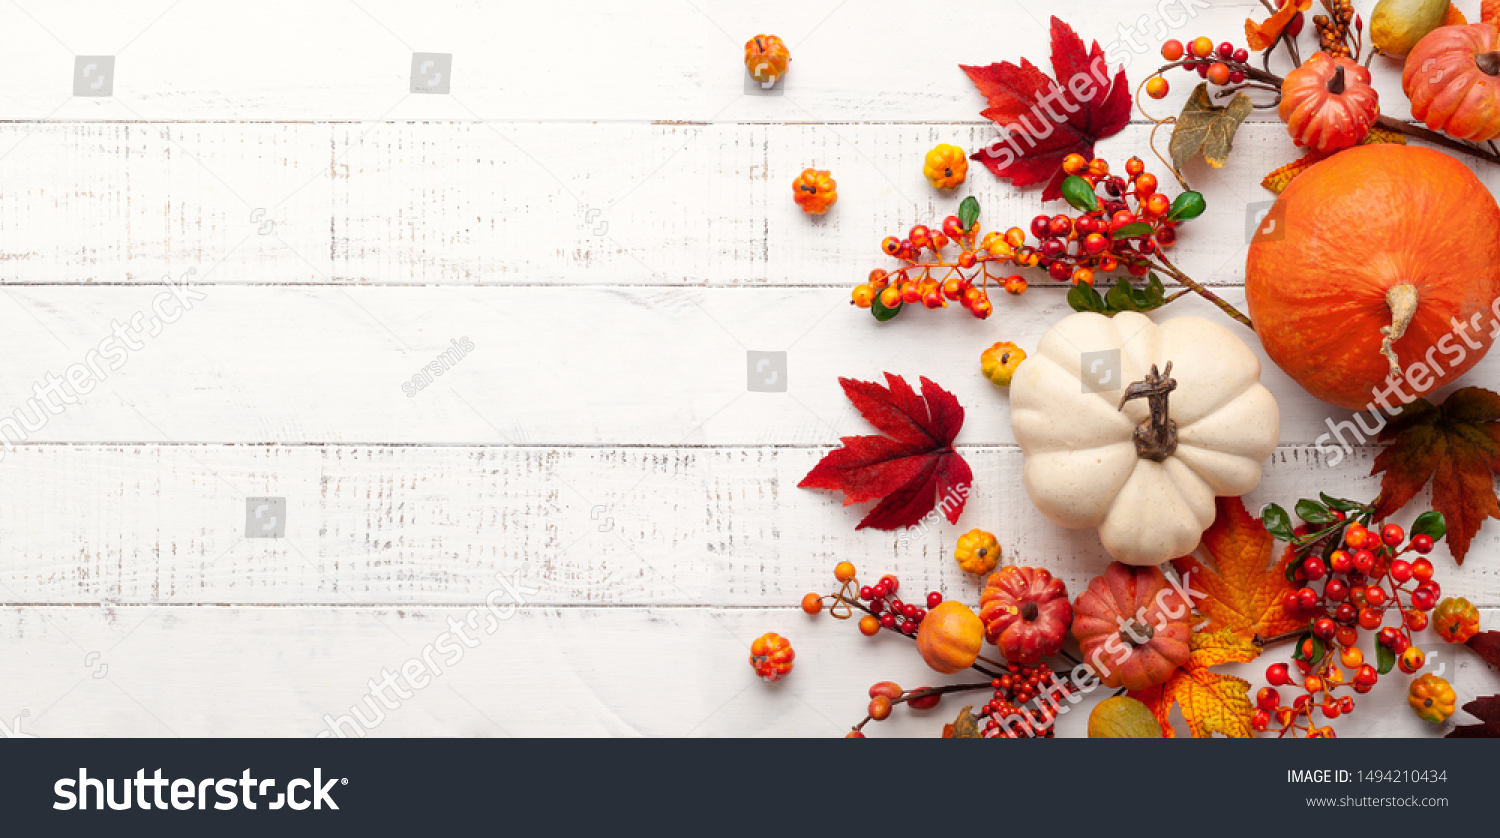 Festive autumn decor from pumpkins, berries and leaves on a white  wooden background. Concept of Thanksgiving day or Halloween. Flat lay autumn composition with copy space. #1494210434